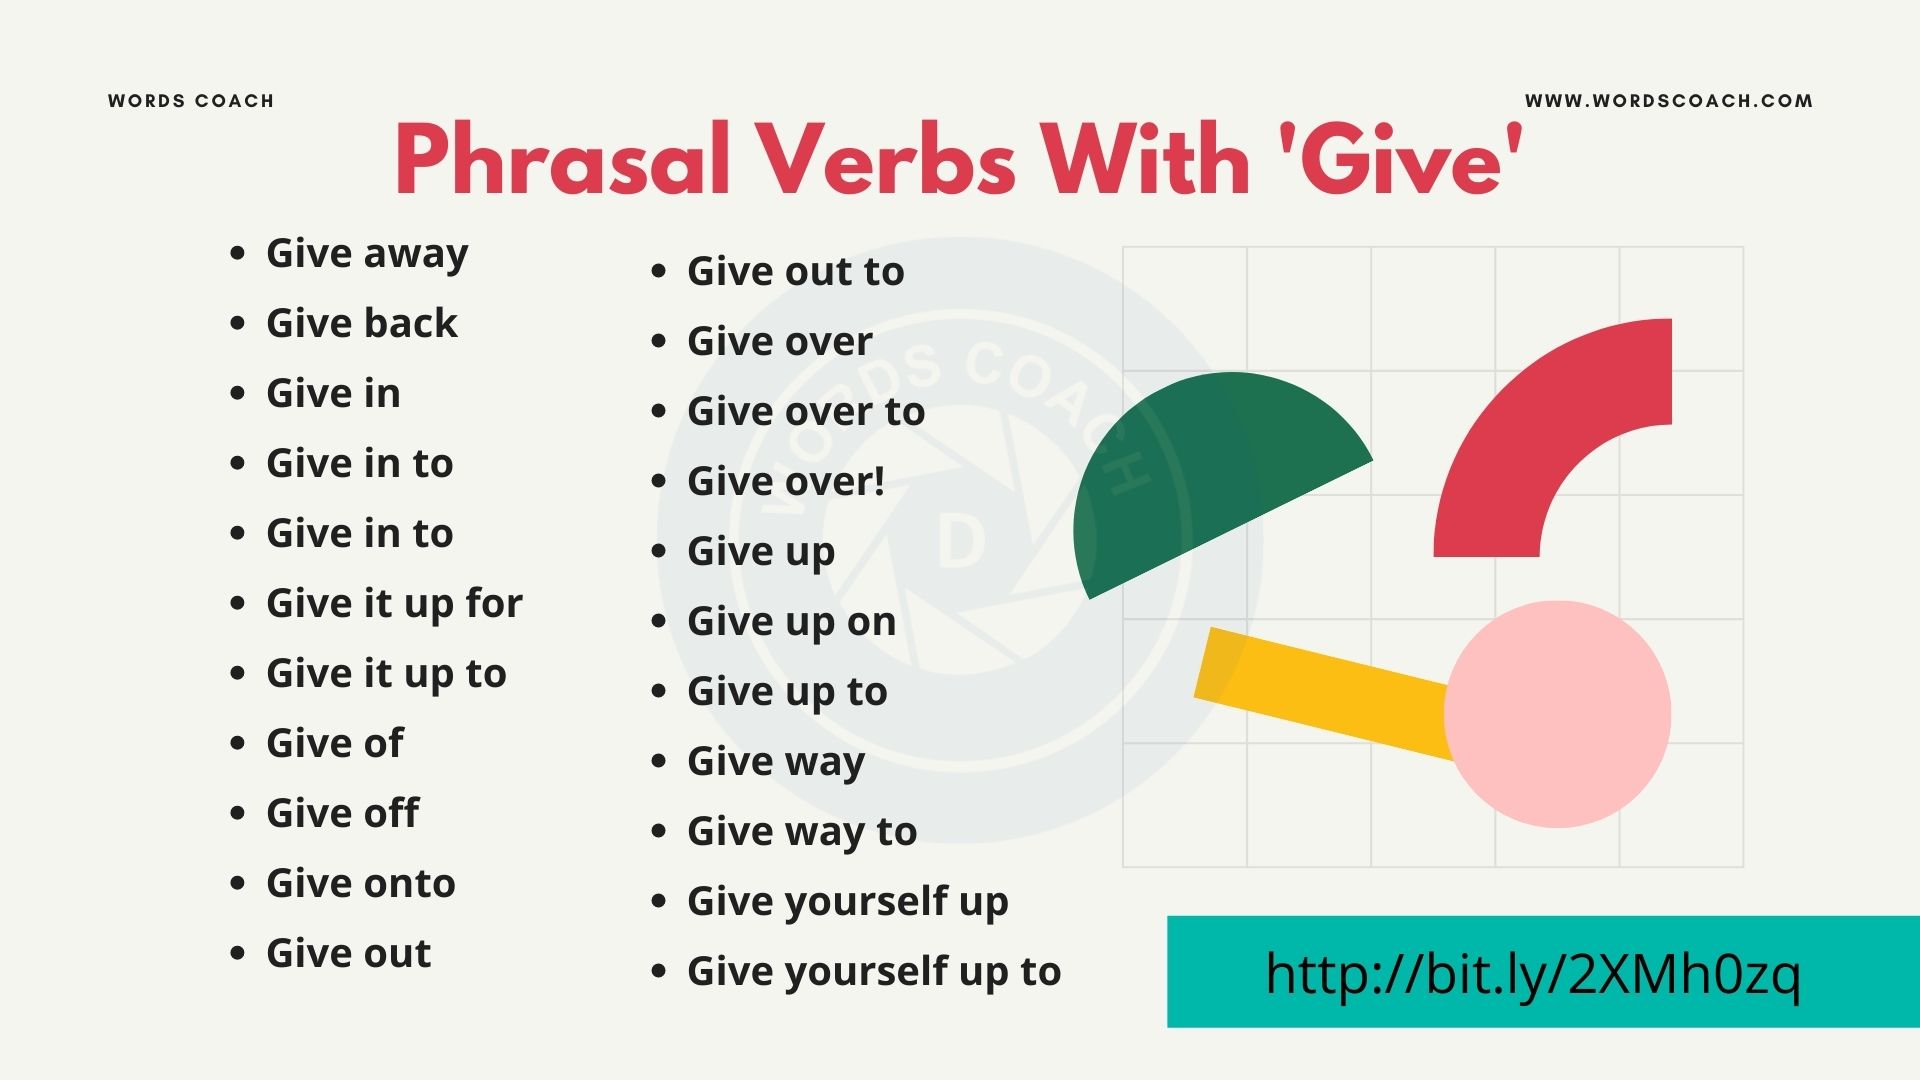 Phrasal Verbs With 'Give' - wordscoach.com